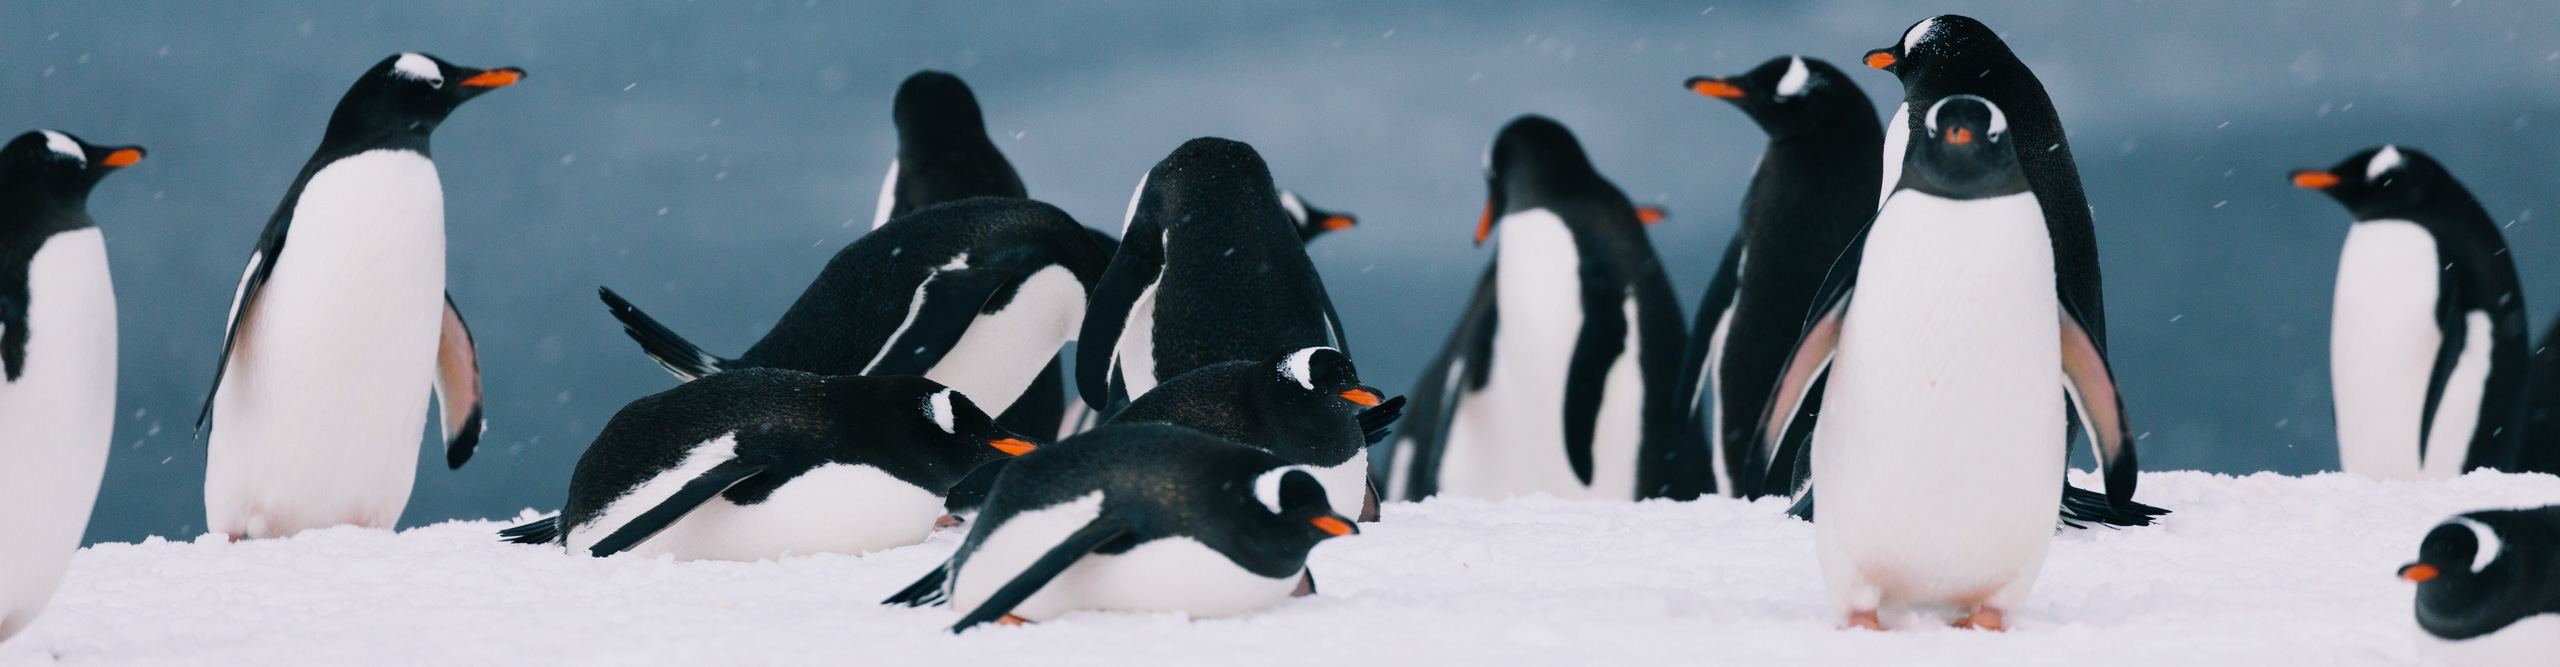 Penguins standing on the ice with snow falling in the sub-antarctic islands, with water behind